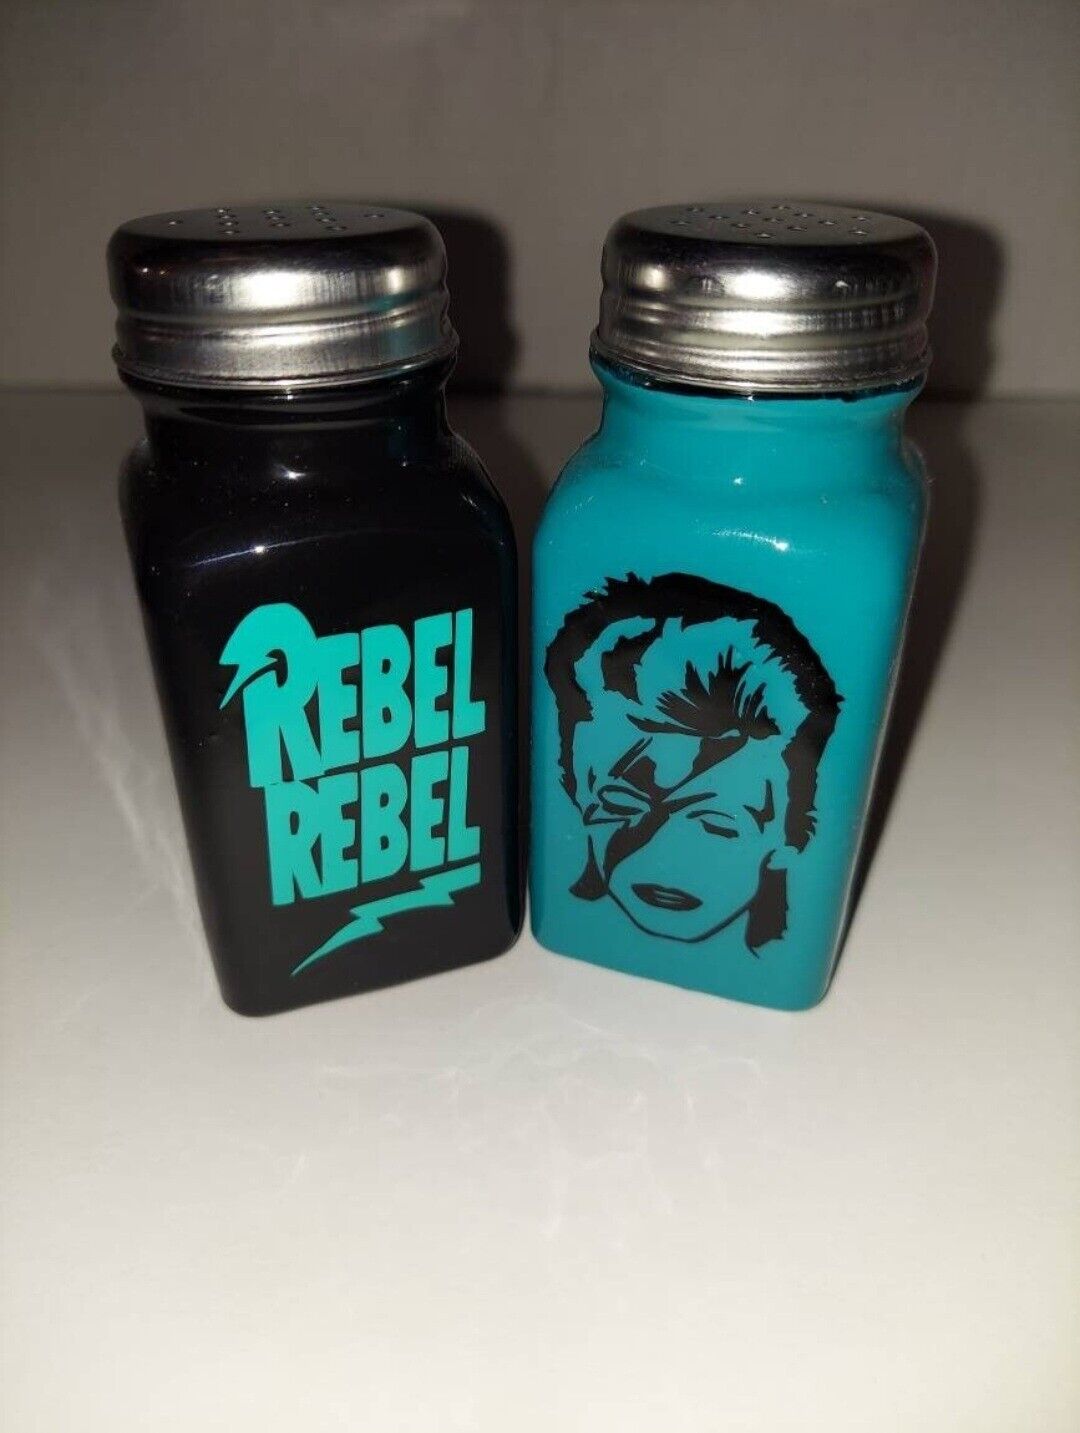 David Bowie shakers.